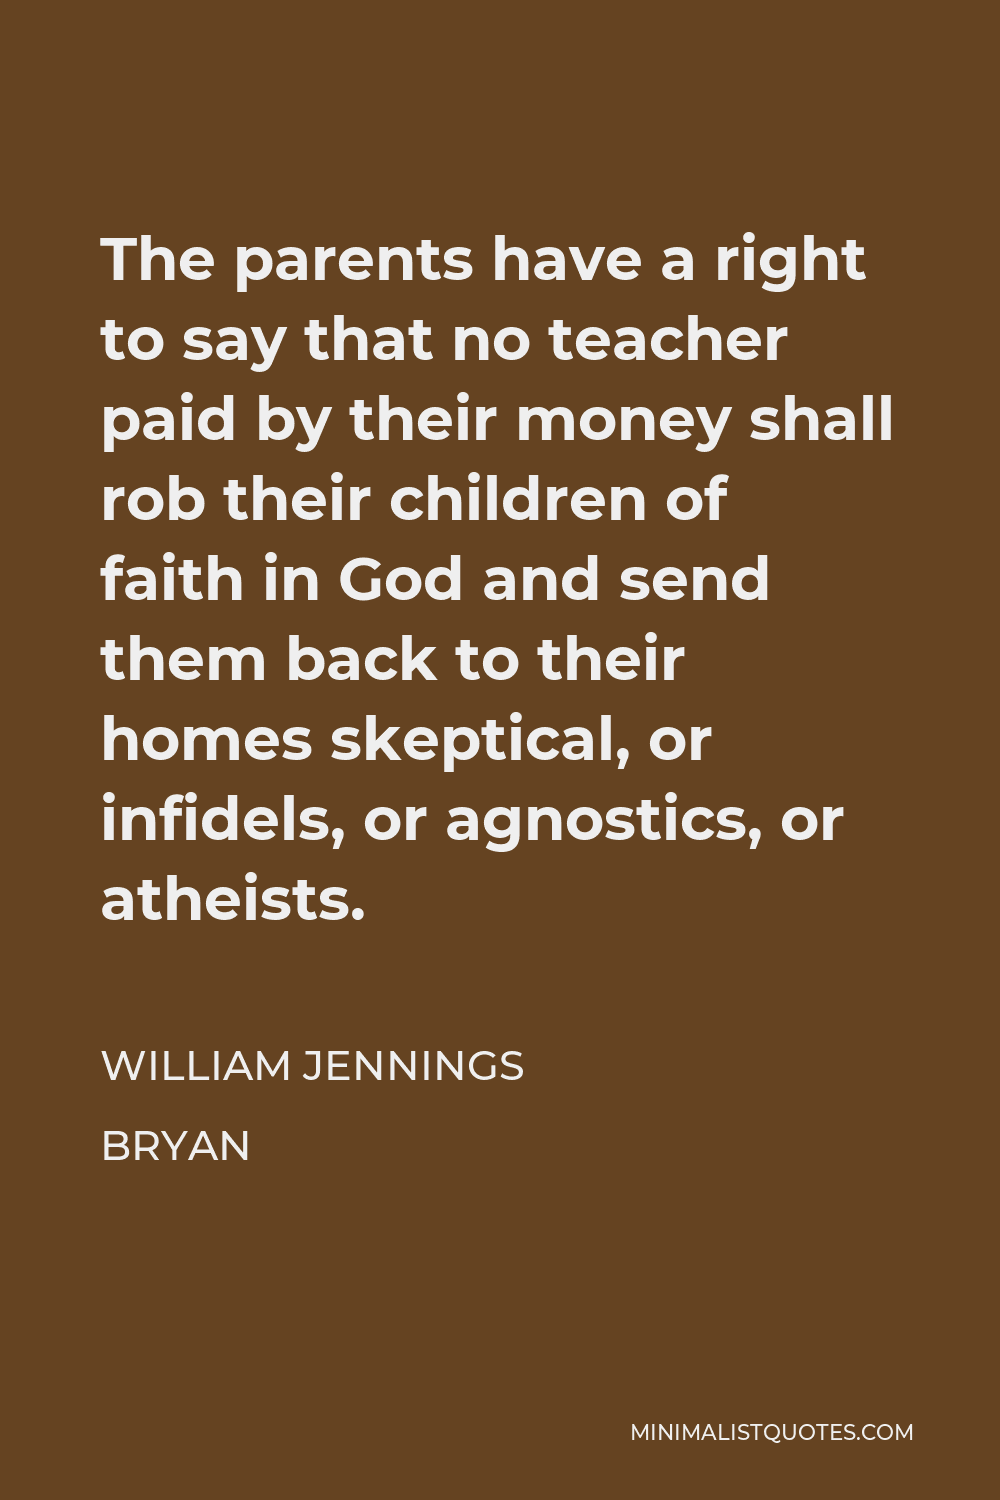 William Jennings Bryan Quote - The parents have a right to say that no teacher paid by their money shall rob their children of faith in God and send them back to their homes skeptical, or infidels, or agnostics, or atheists.